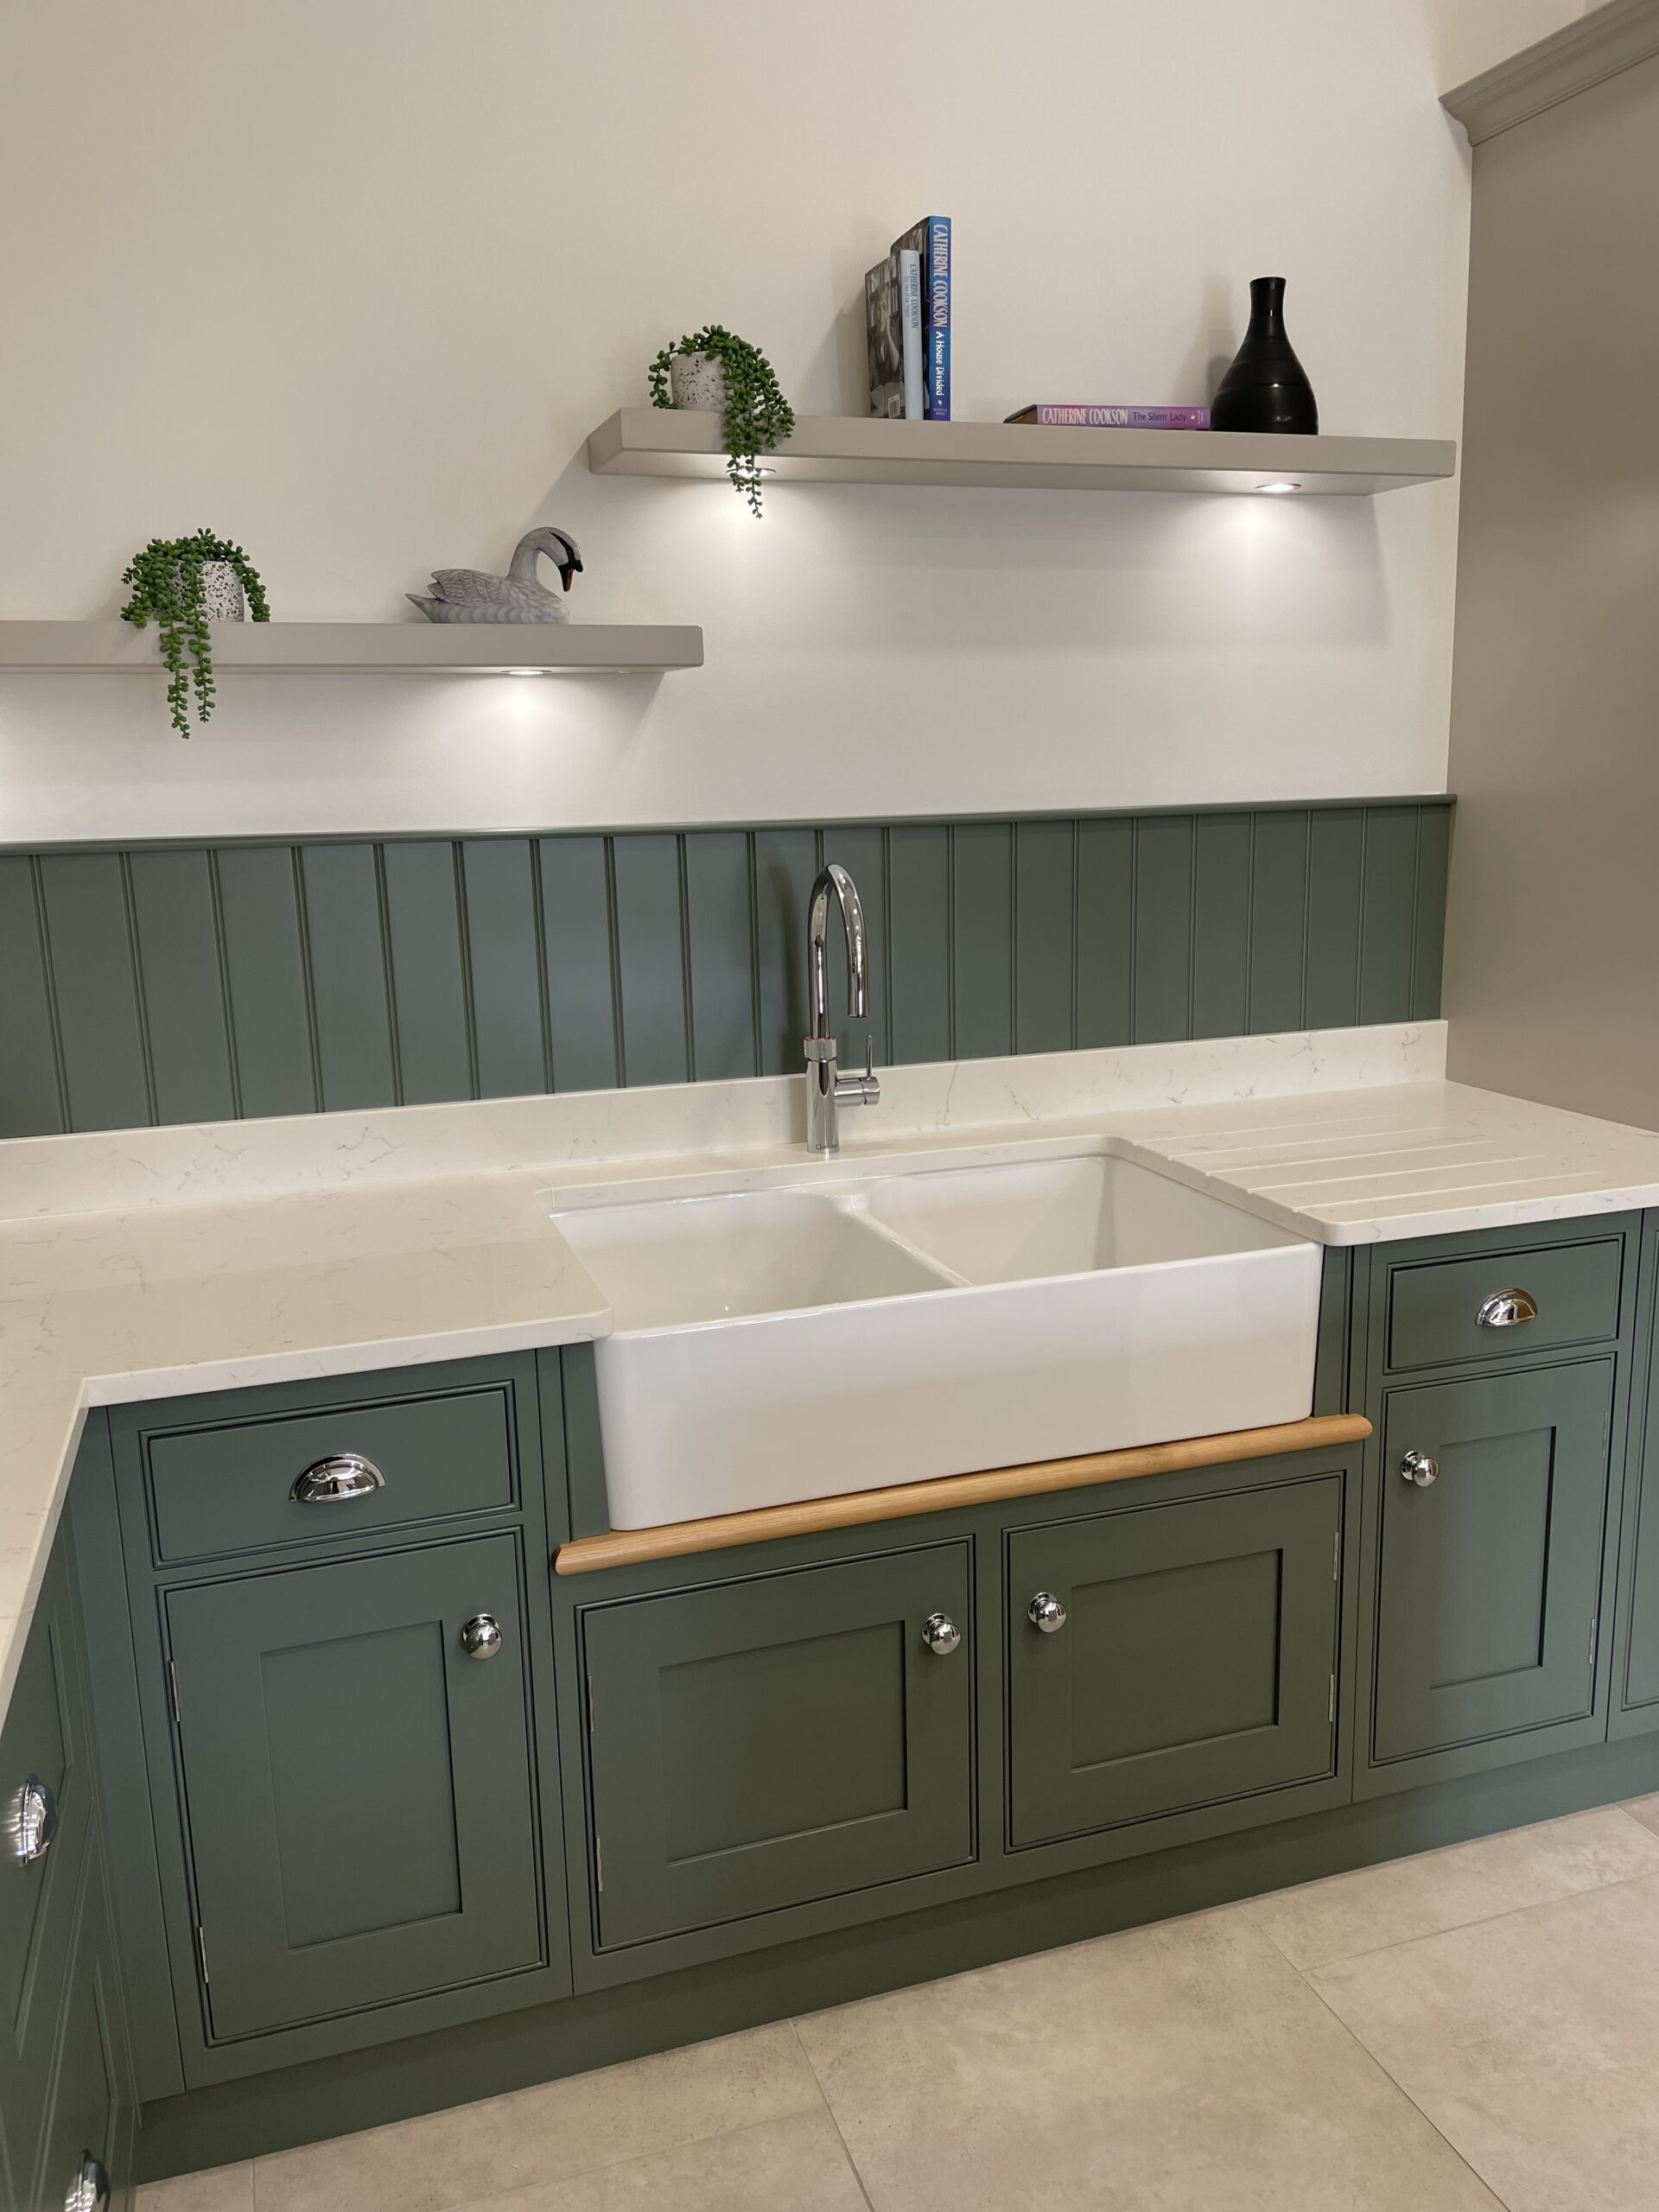 Unveiling New Colour Trends in Our Refurbished Kitchen Showroom - Knights Country Kitchens - Suffolk, Essex, Hertfordshire